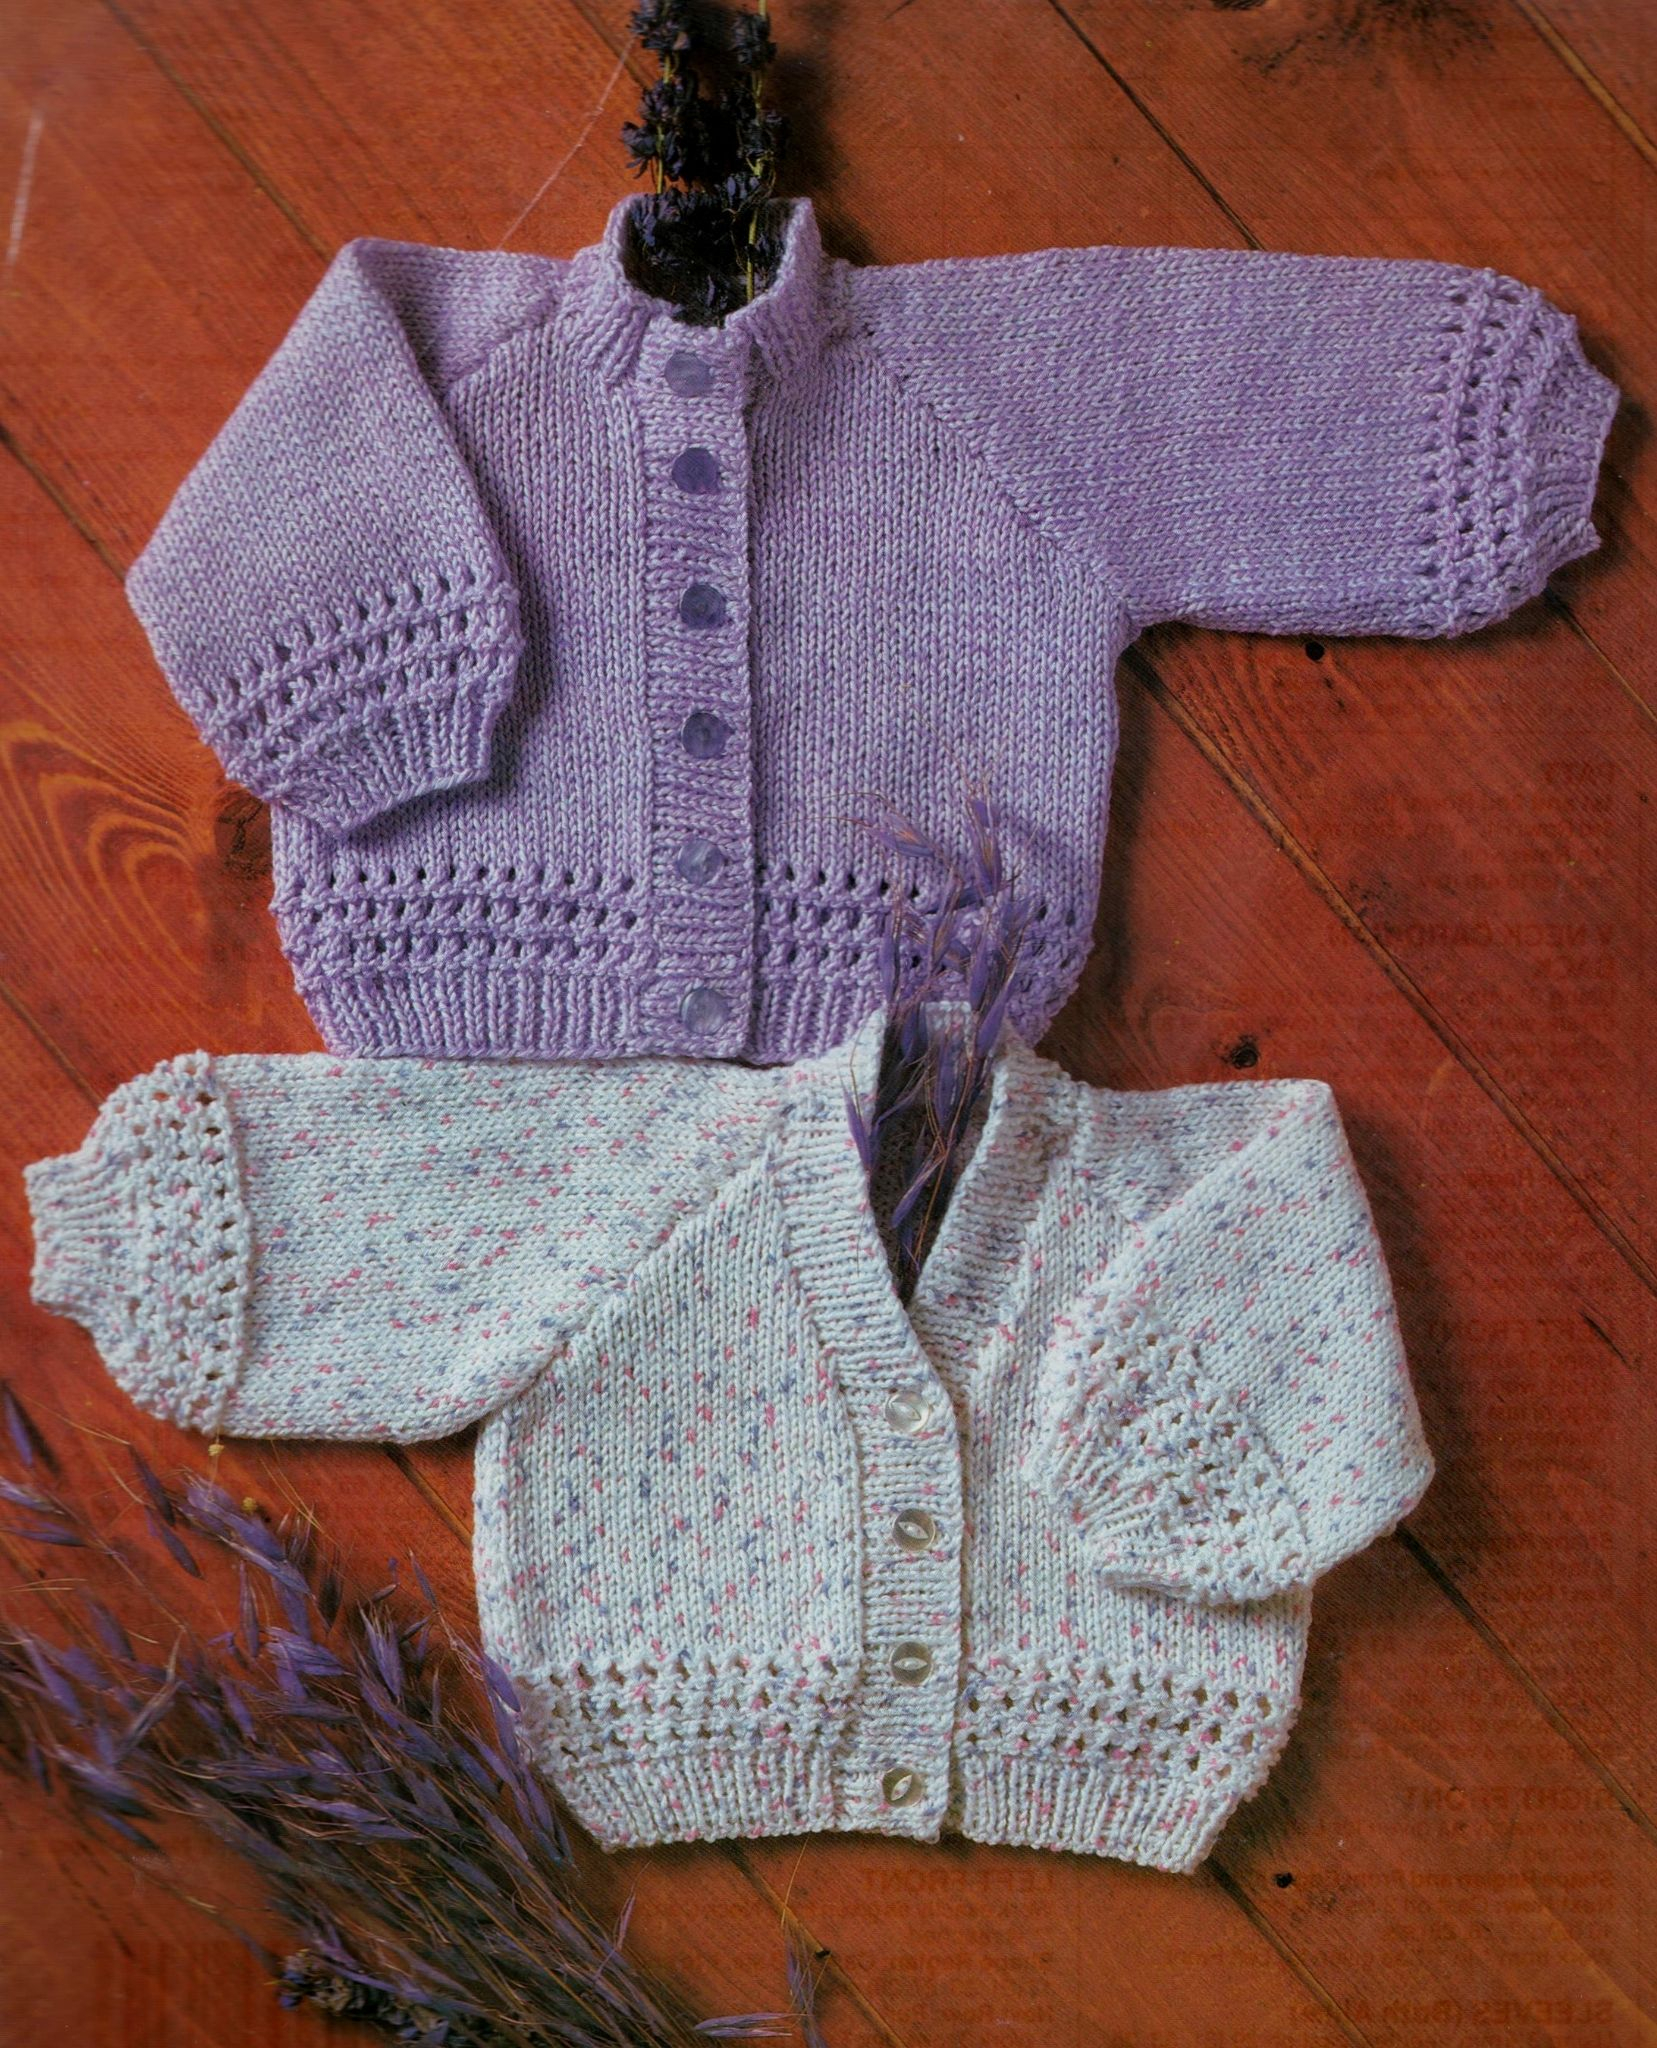 Baby Coat Knitting Pattern Pdf Digital Download Ba Knitting Pattern Ba Cardigan With 2 Necklines In Double Knitting Chest 14 To 22